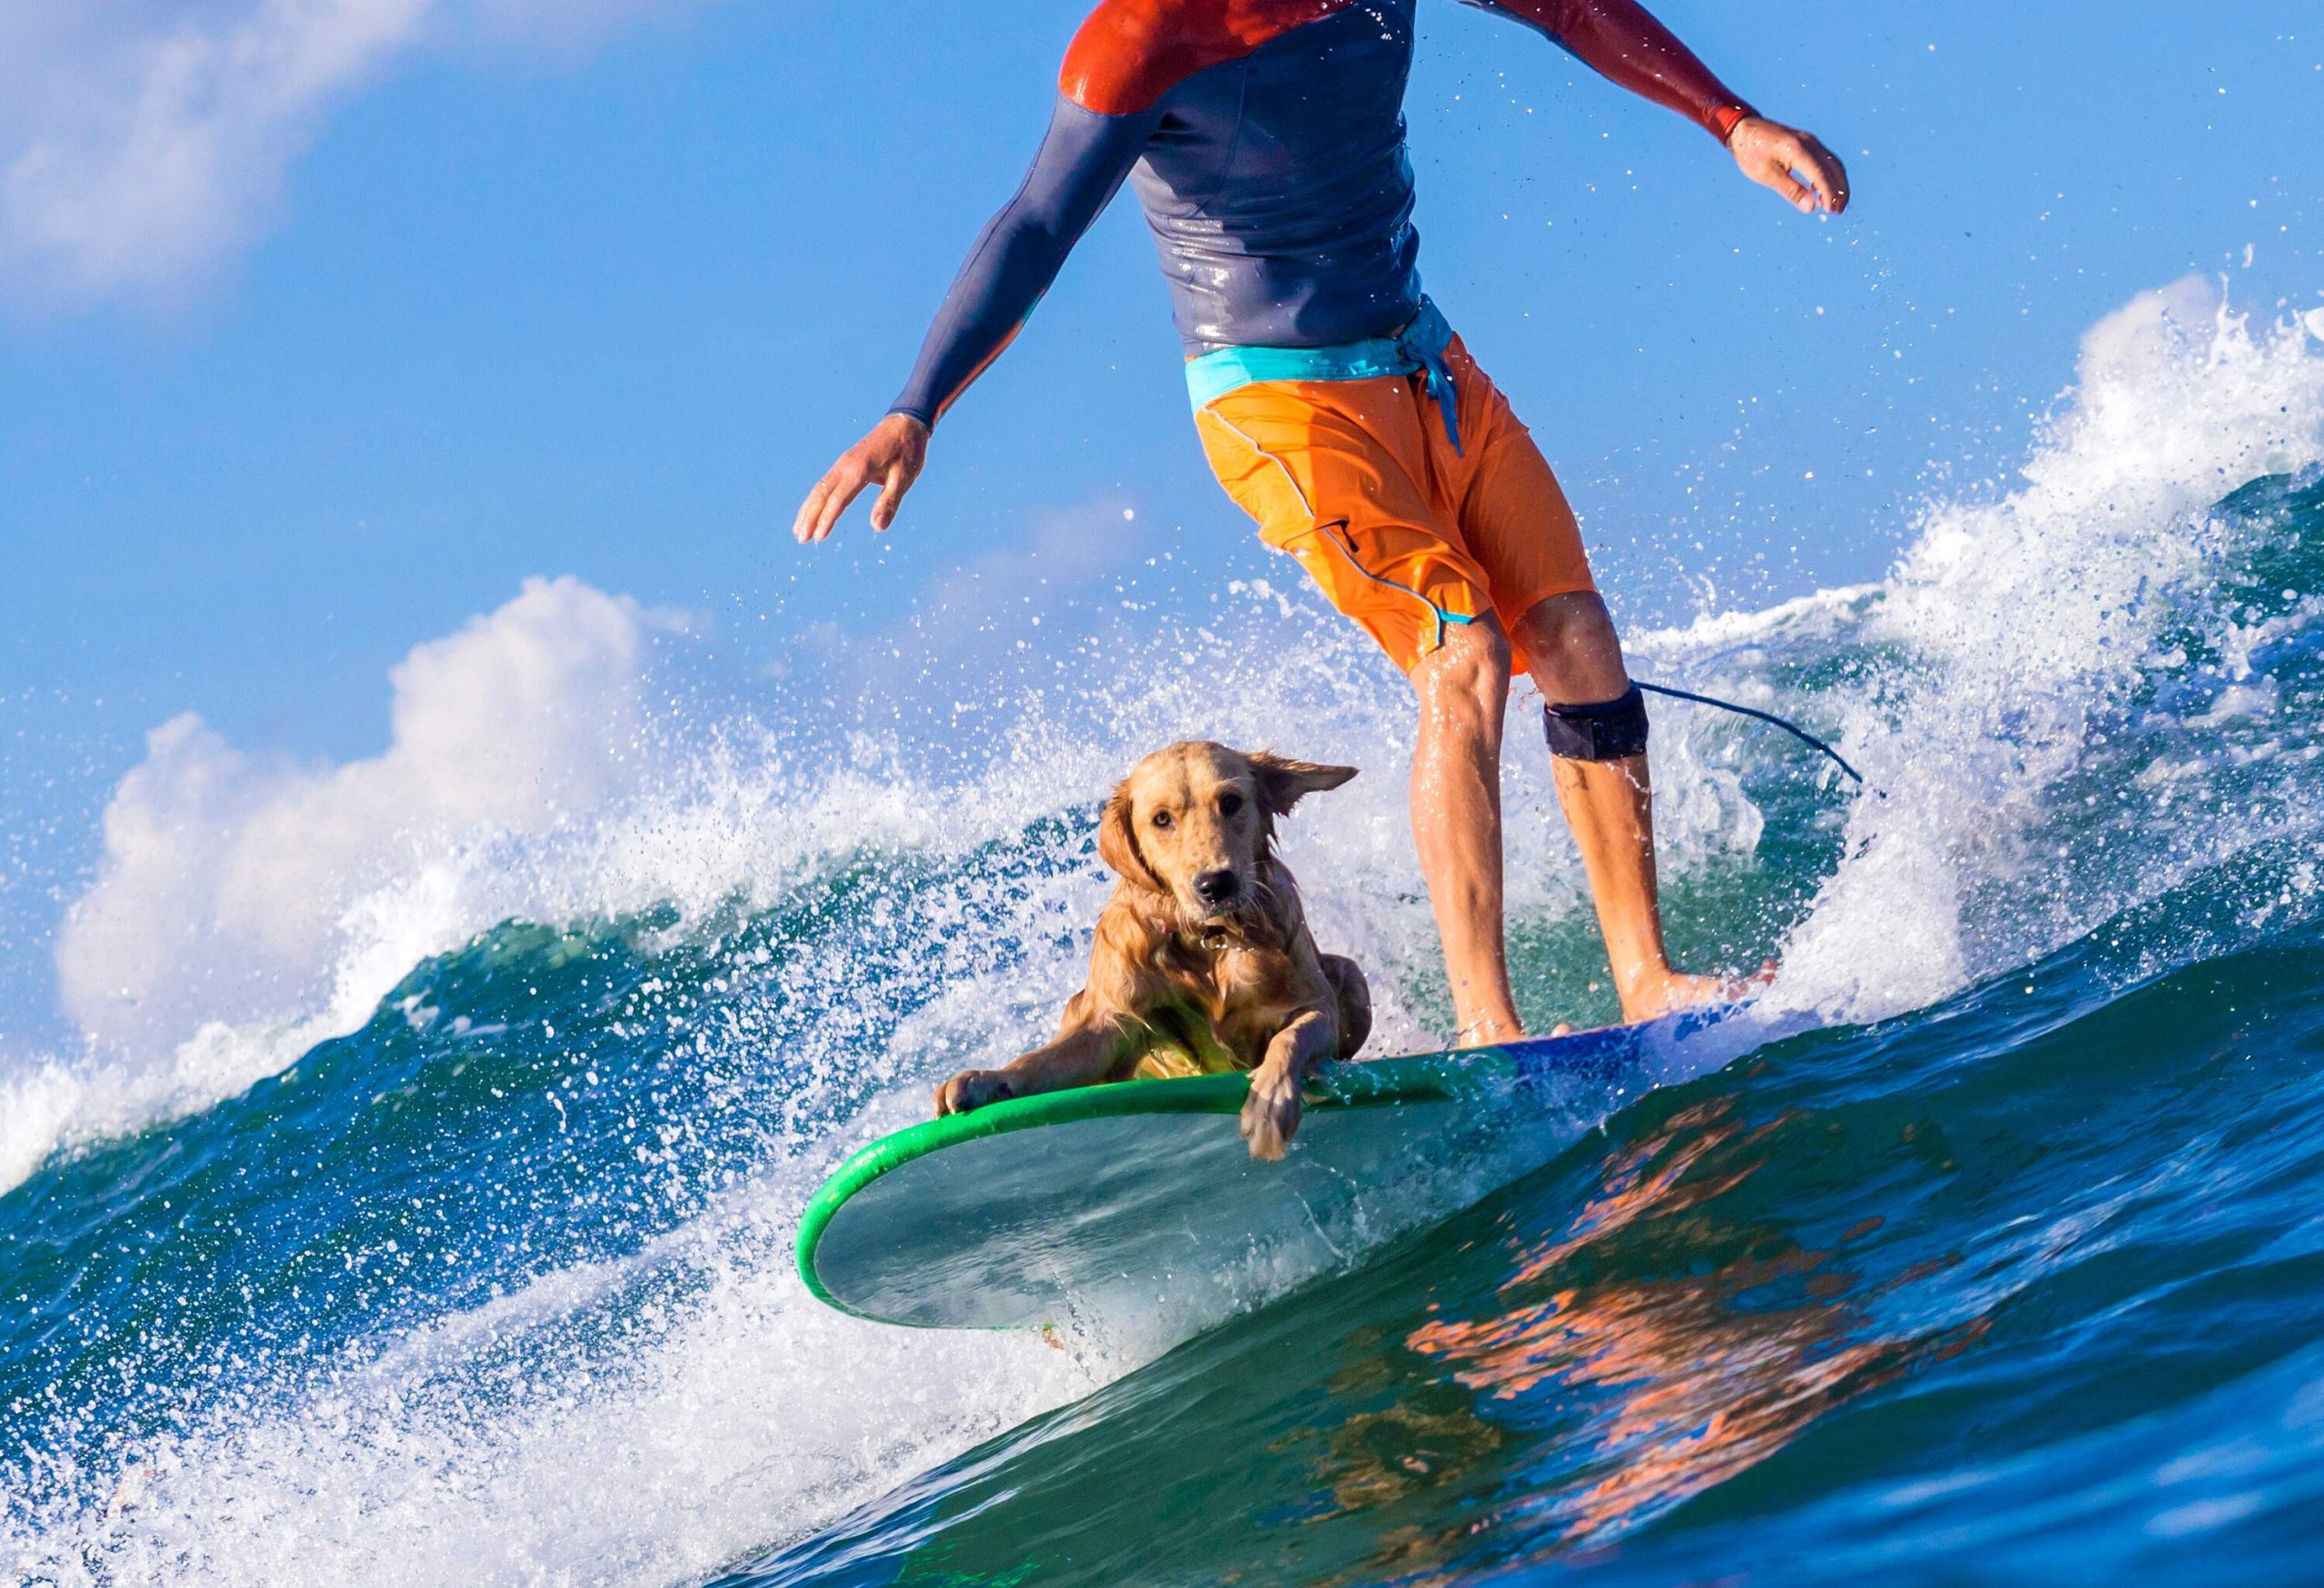 Surfer in a colourful swimwear rides the waves with a brown dog on a surfboard.